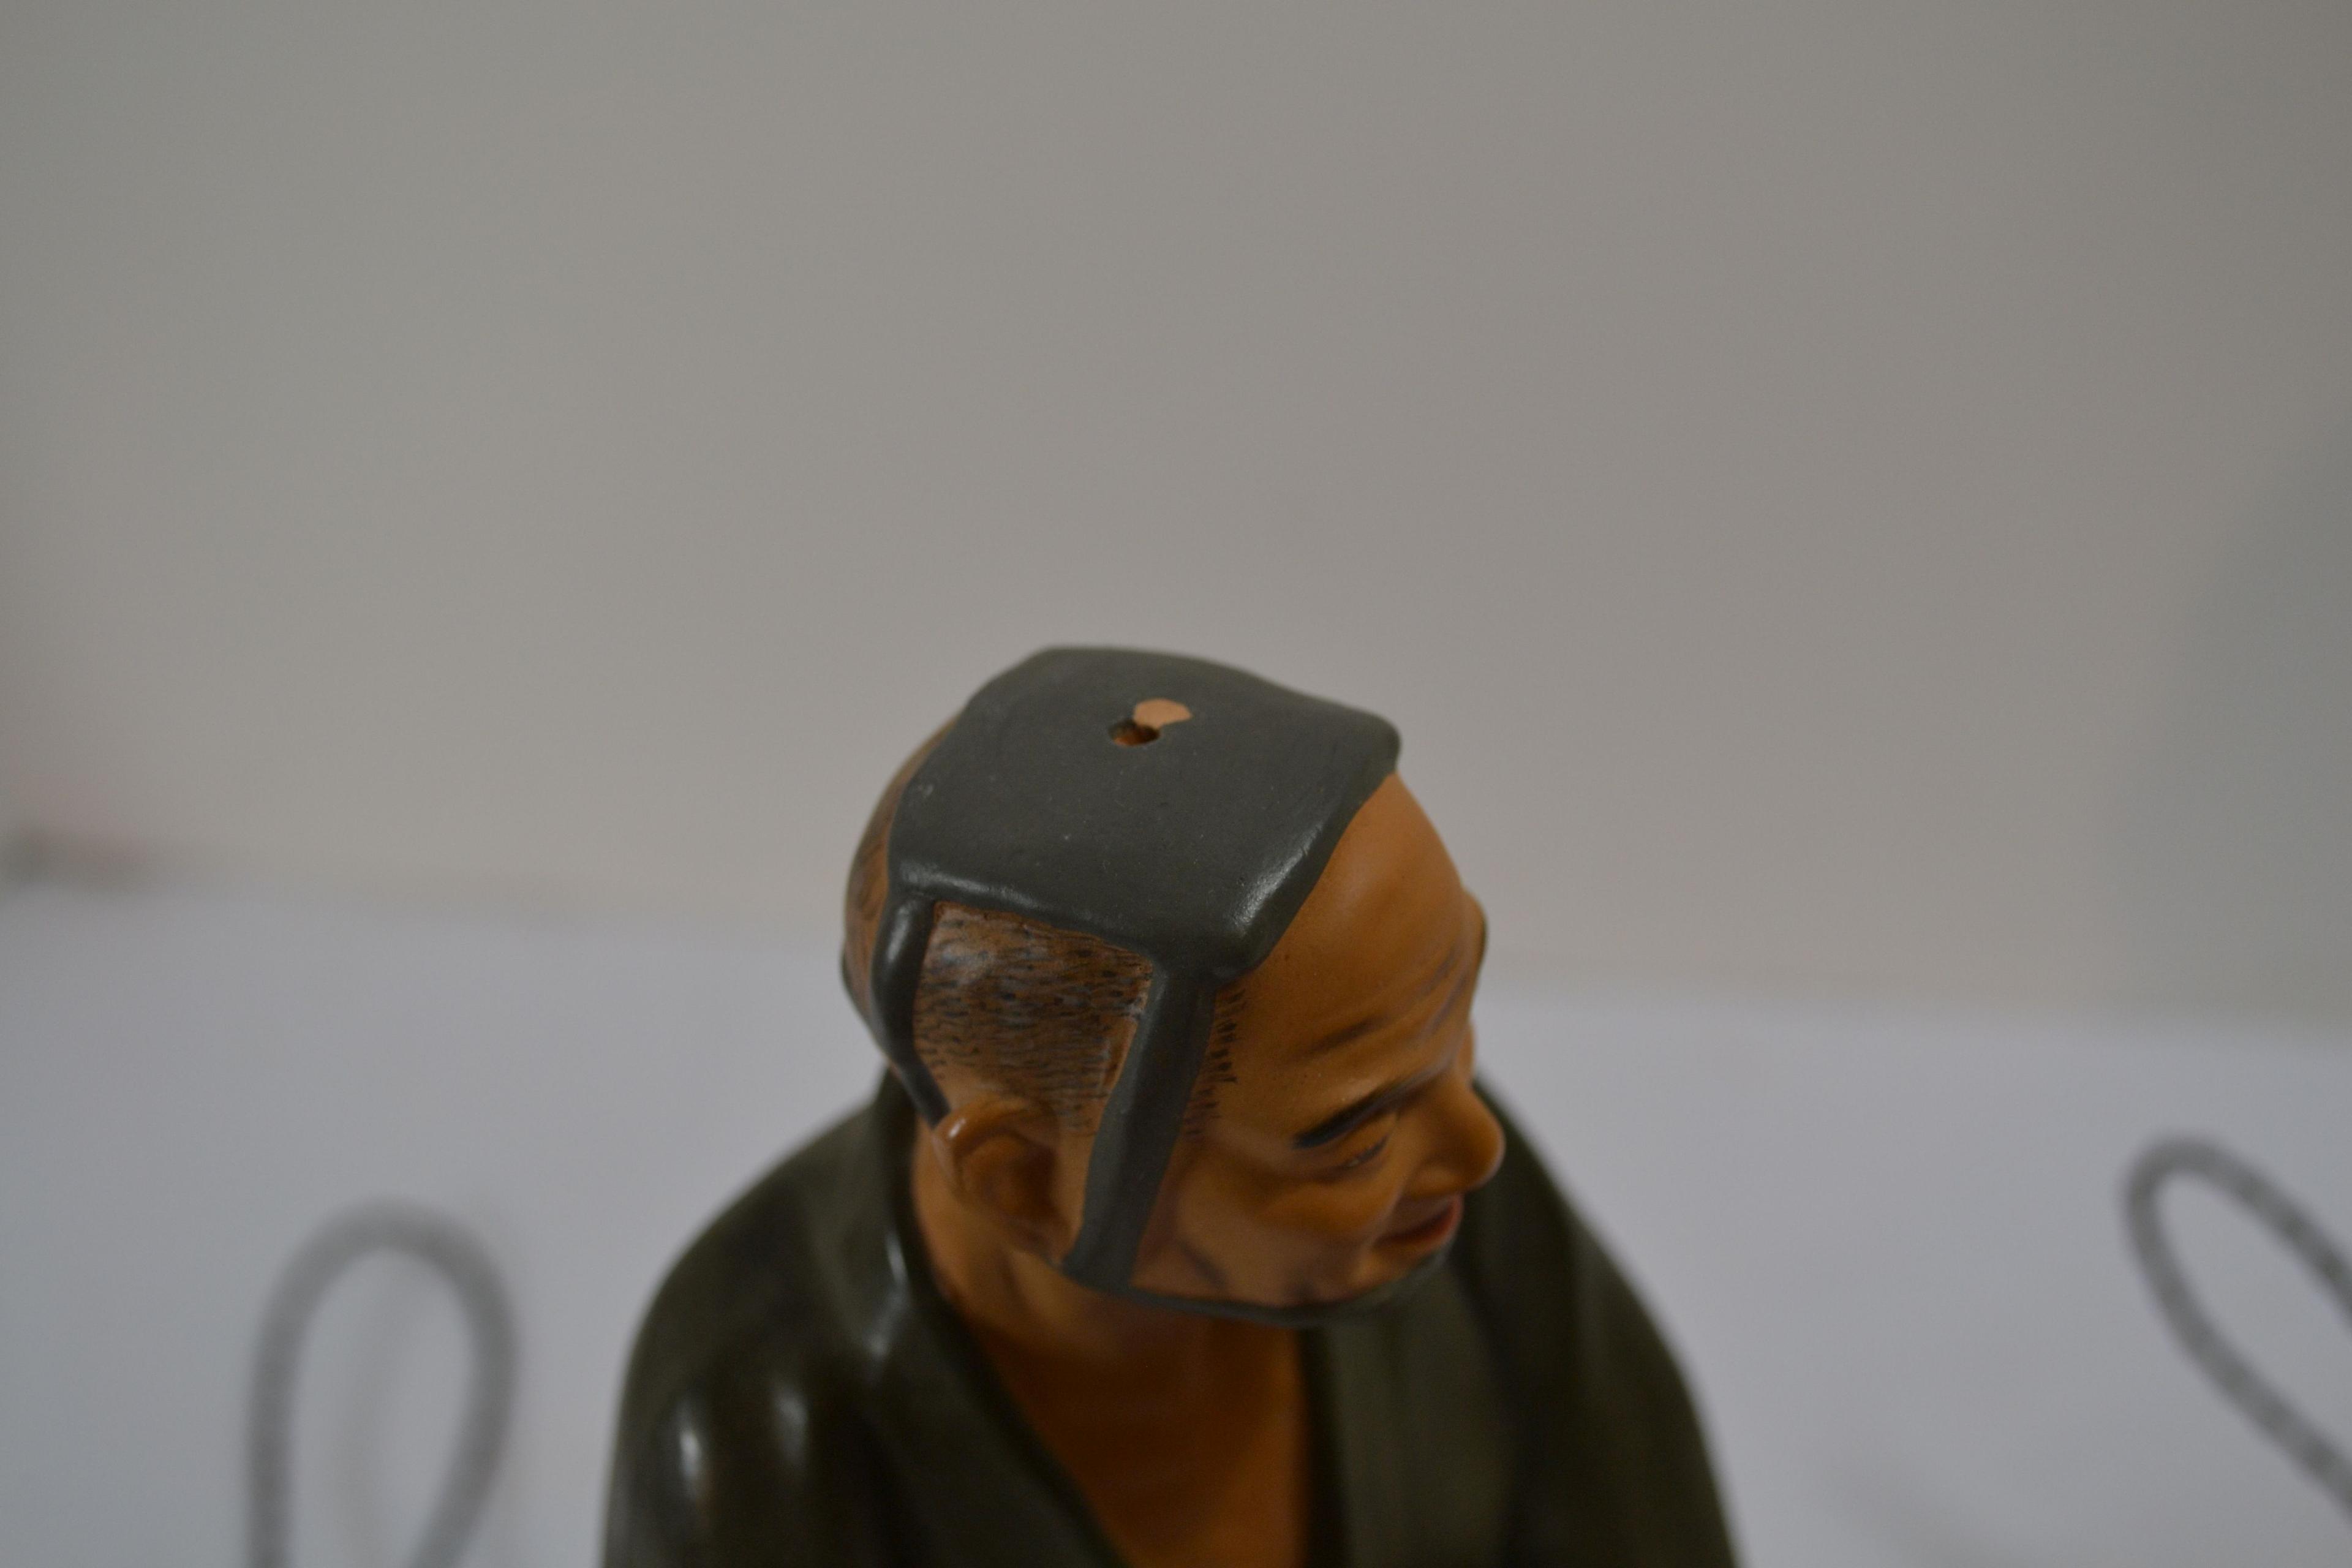 Vintage 12" Hakata Figurine "Man Carrying Buckets"; Missing Carrying Staff